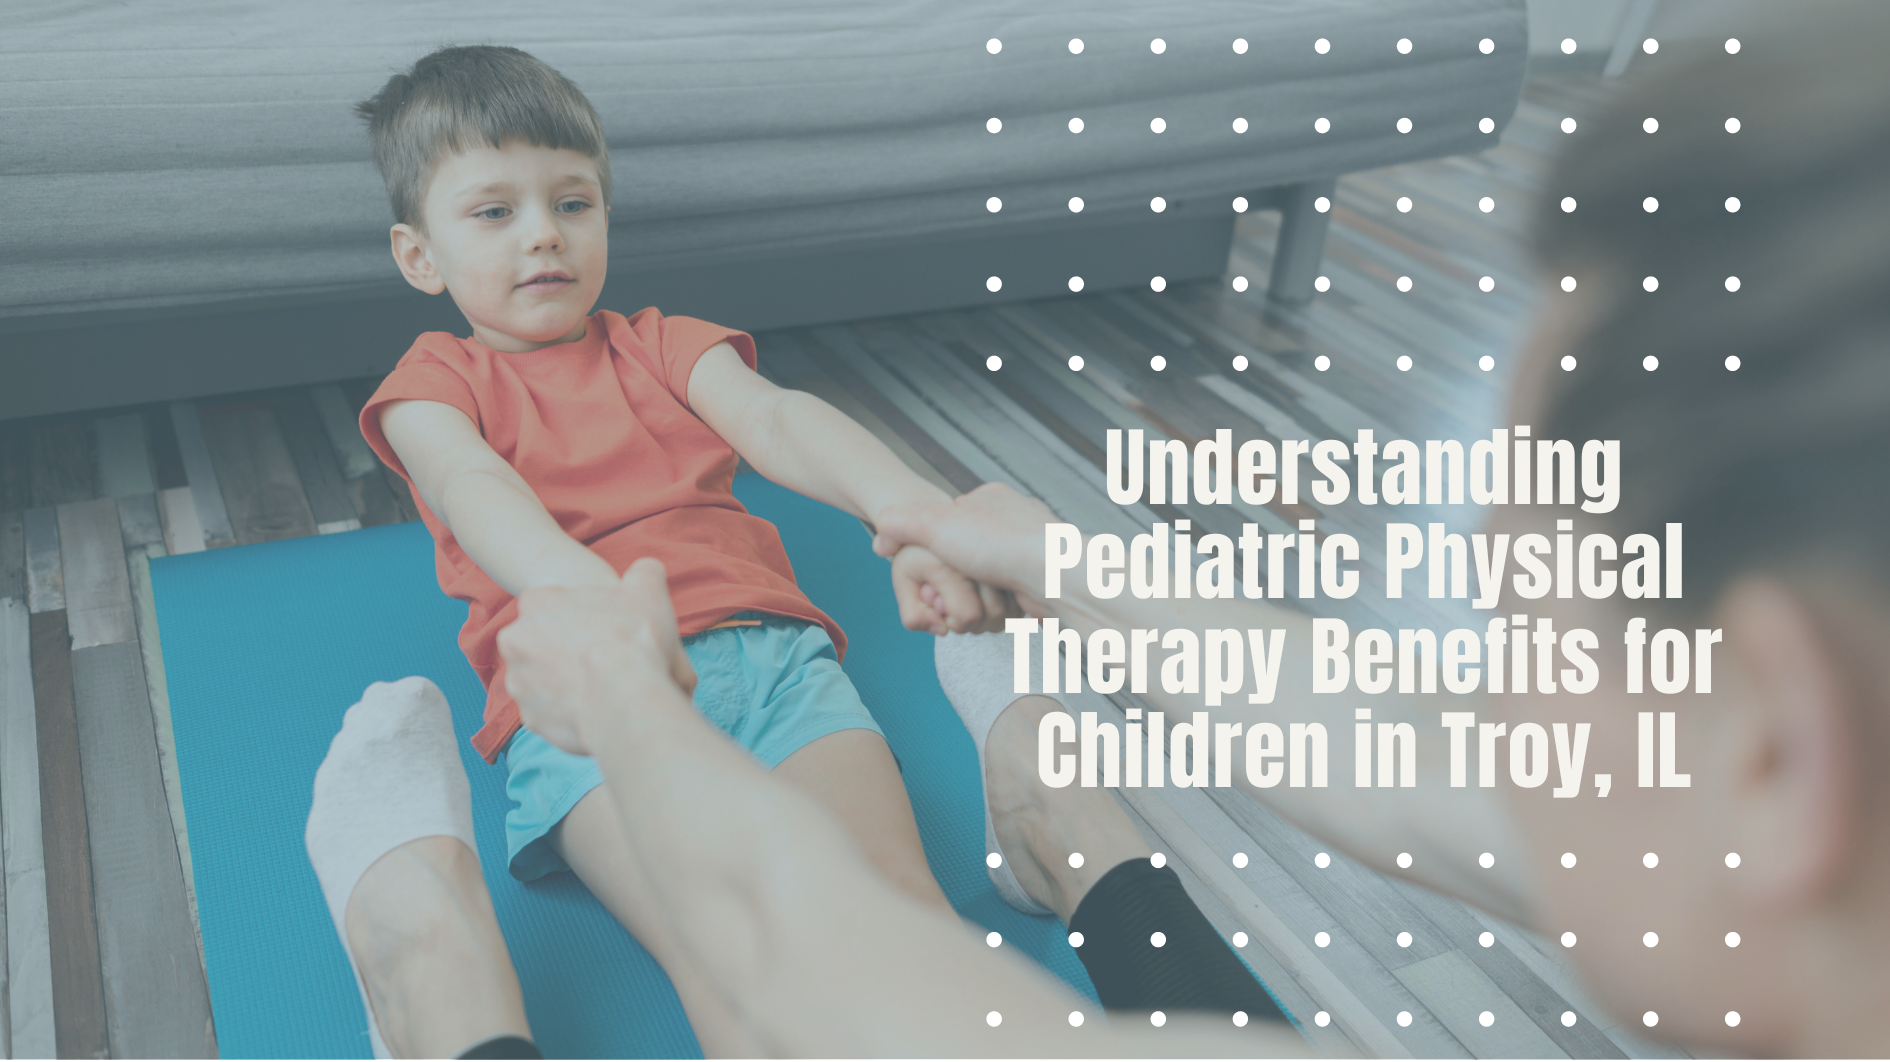 Understanding Pediatric Physical Therapy Benefits for Children in Troy, IL